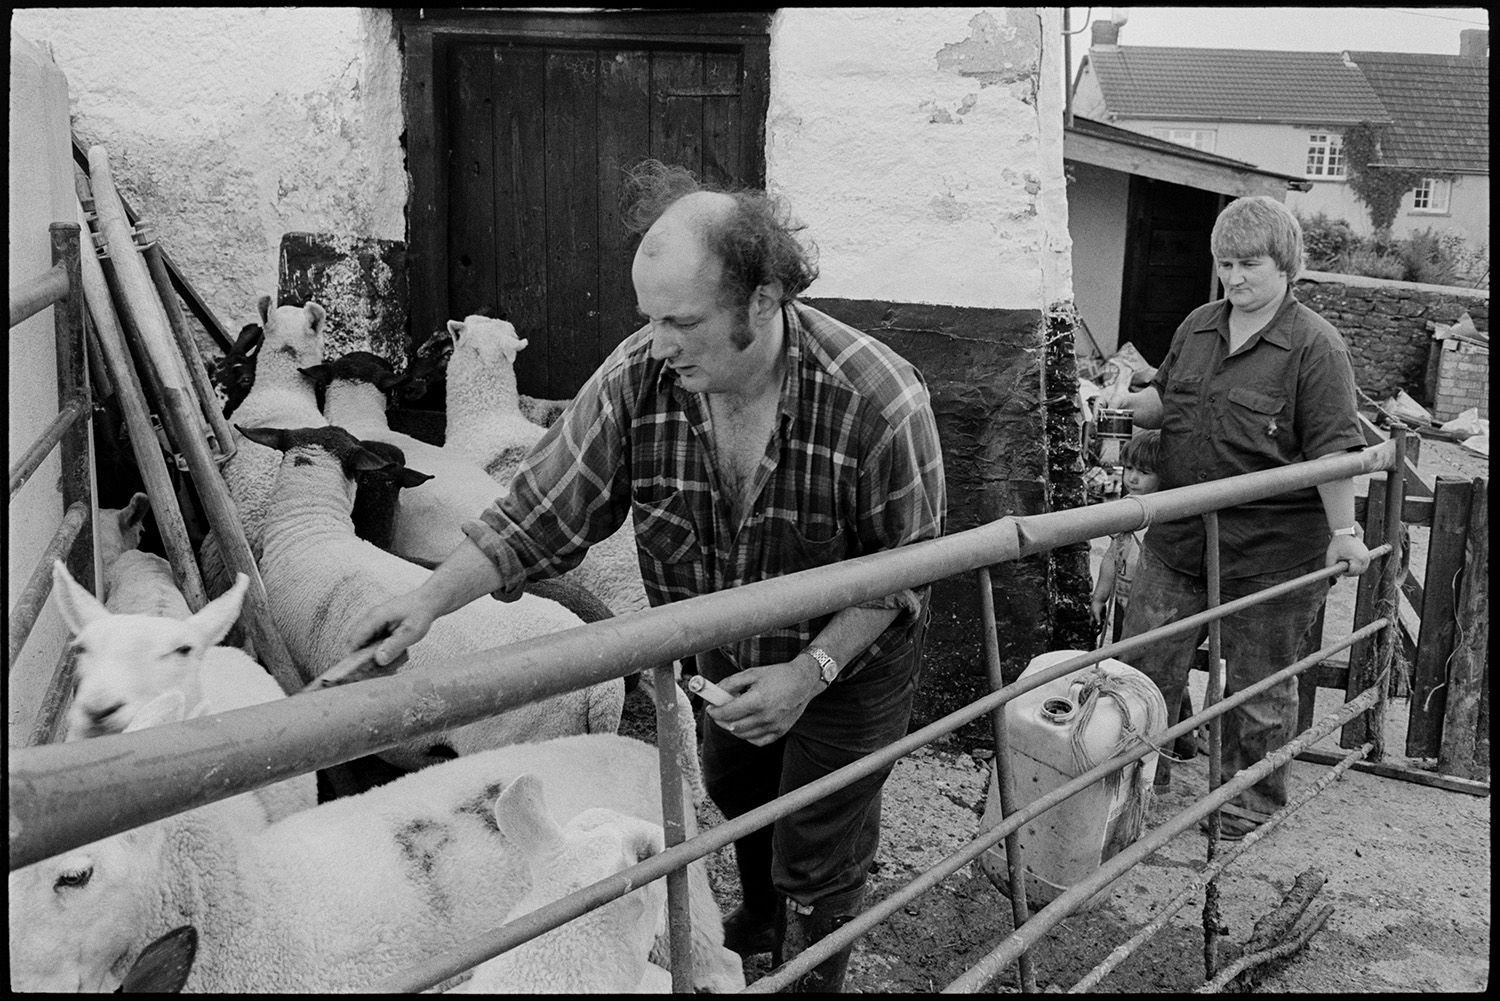 Farmers marking shorn sheep in farmyard.
[Peter Jones marking shorn sheep in a small yard at Upcott Farm, Dolton. A woman, probably his wife, and a small child are watching on by a metal gate. She is holding a pot of dye.]